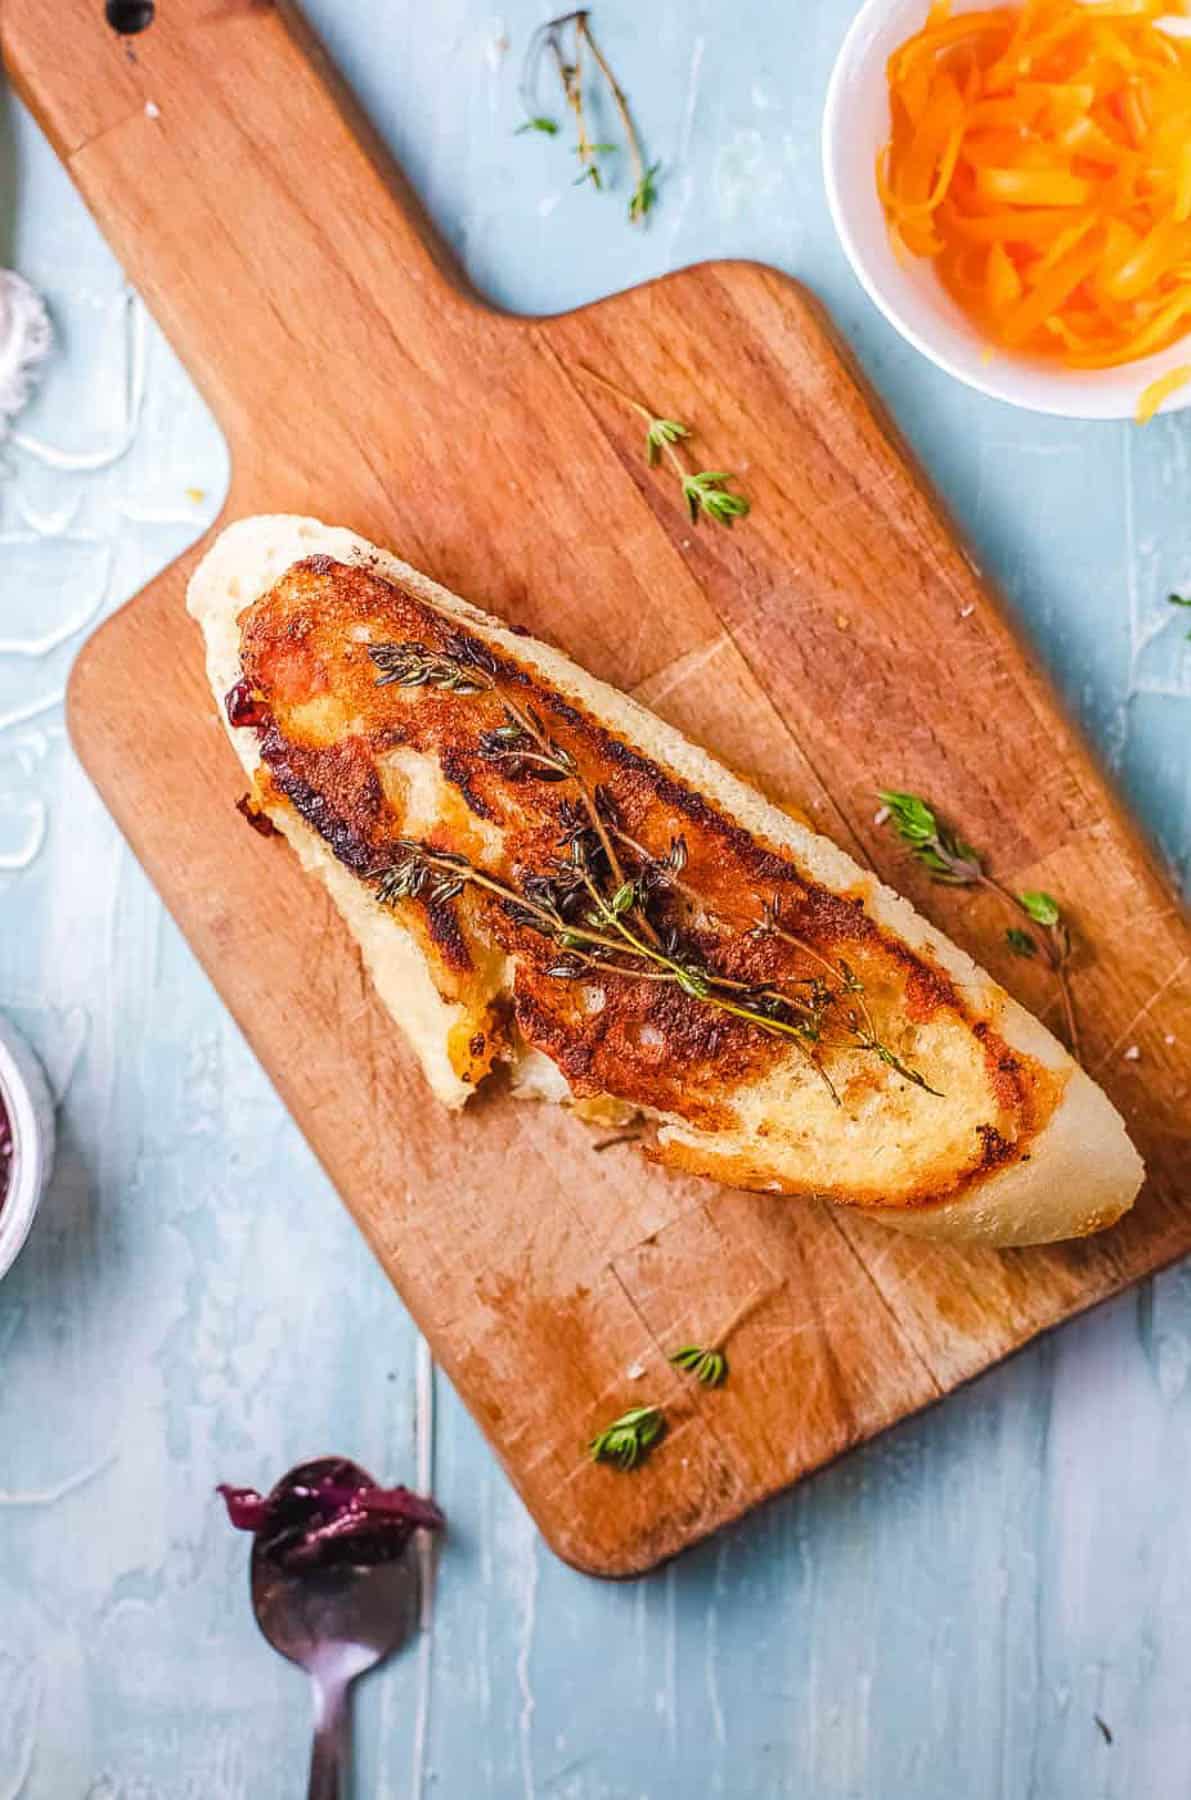 Overhead s،t of a wooden tray with a garlic bread grilled cheese sandwich on top.